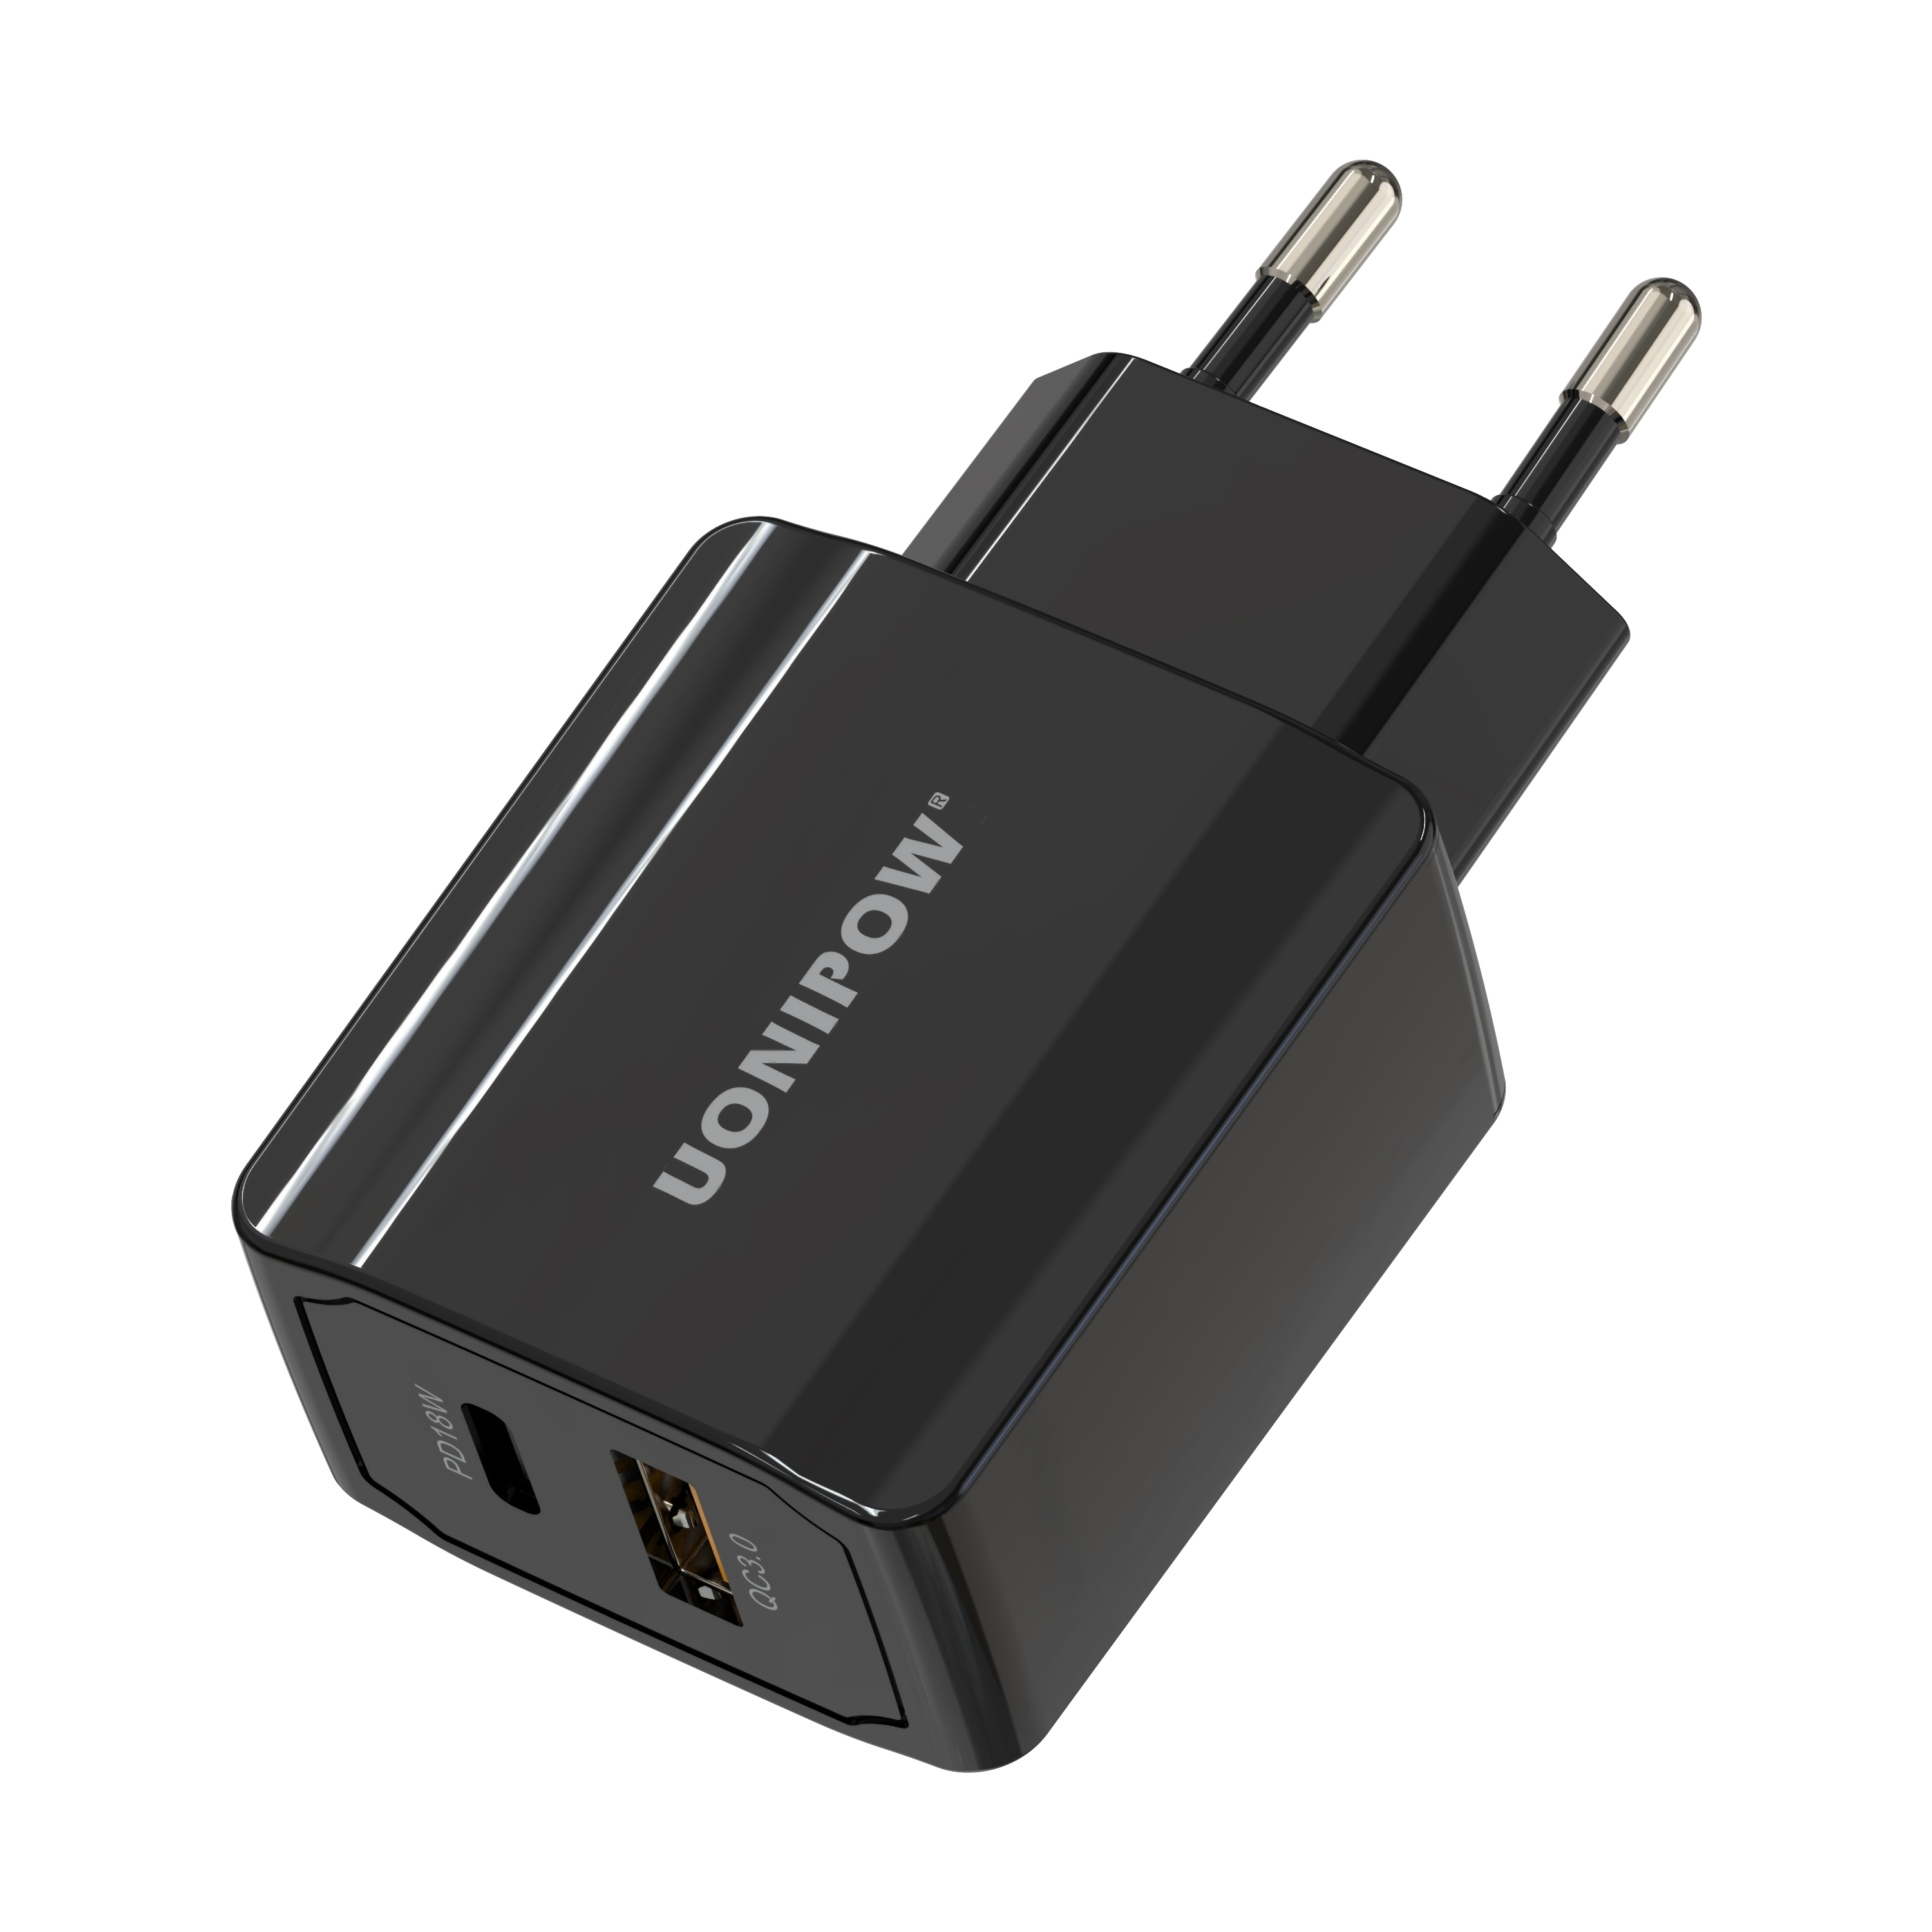 2020 new product c-type adapter qc3.0 fast charging dual-port wall charger 18w mobile phone charger